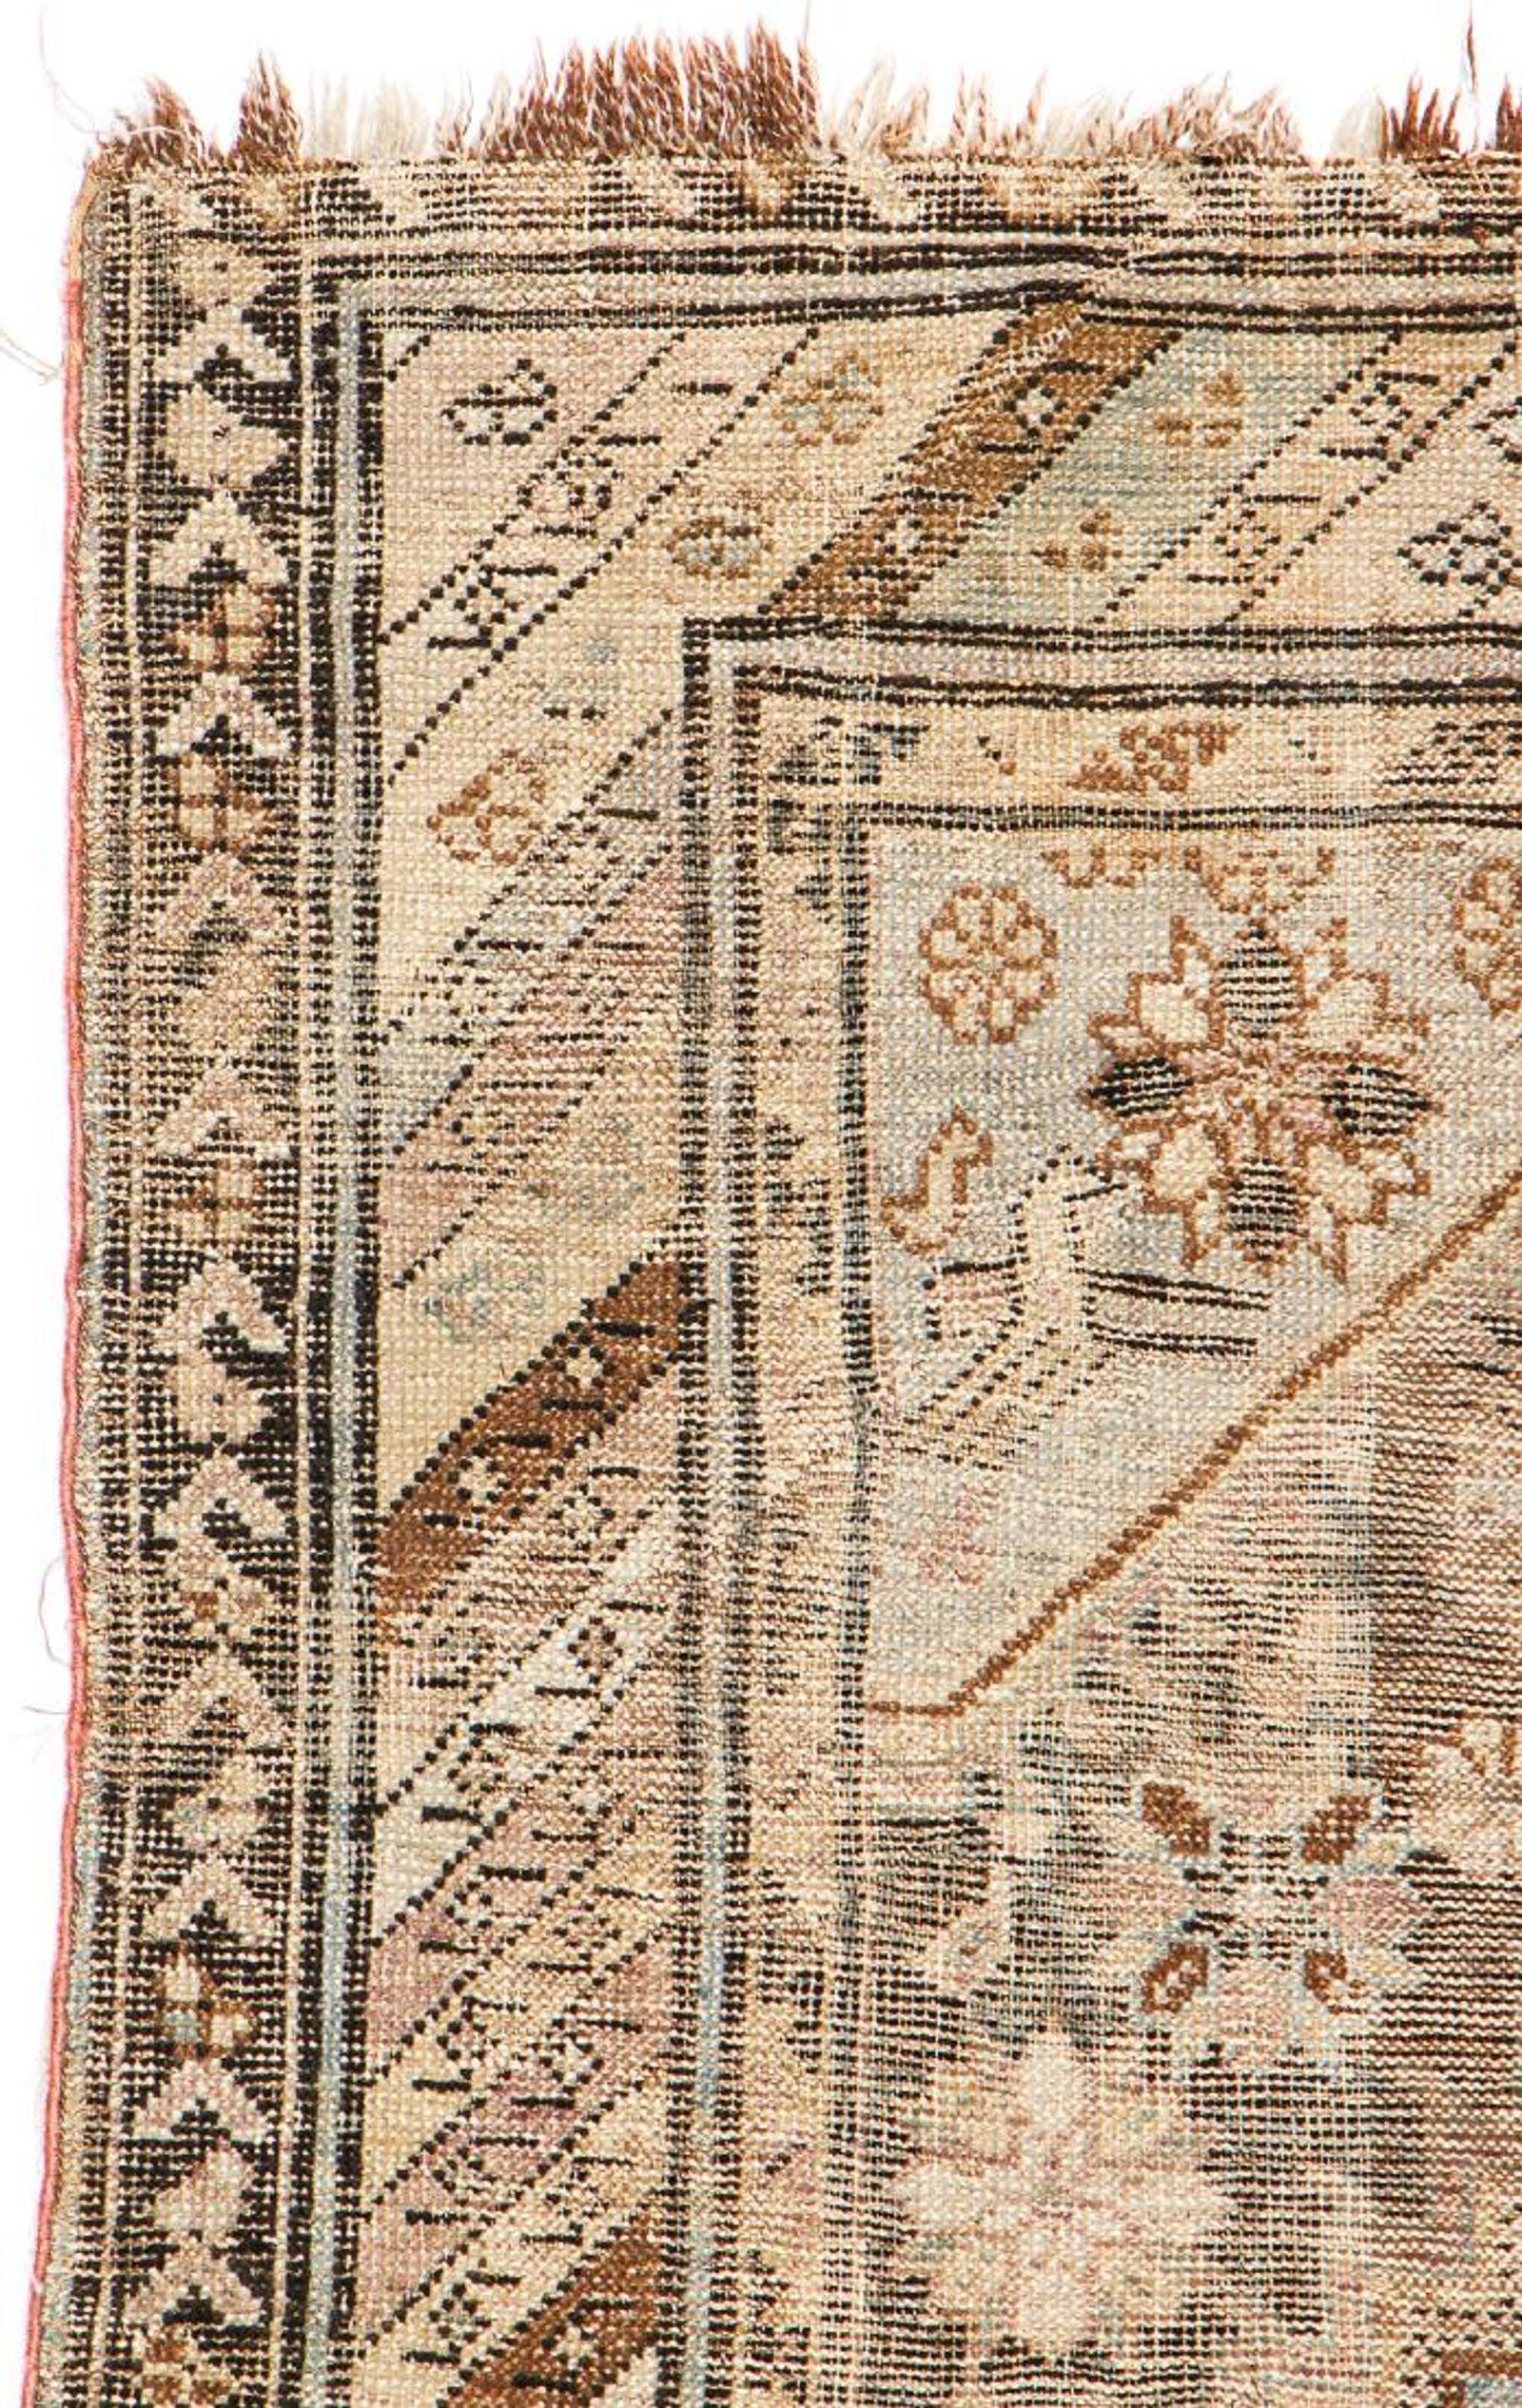 Antique Kuba rug, late 19th century, Caucasus: 3' x 4'6'' (91 x 137 cm). Some fading and wear consistent with age and use.